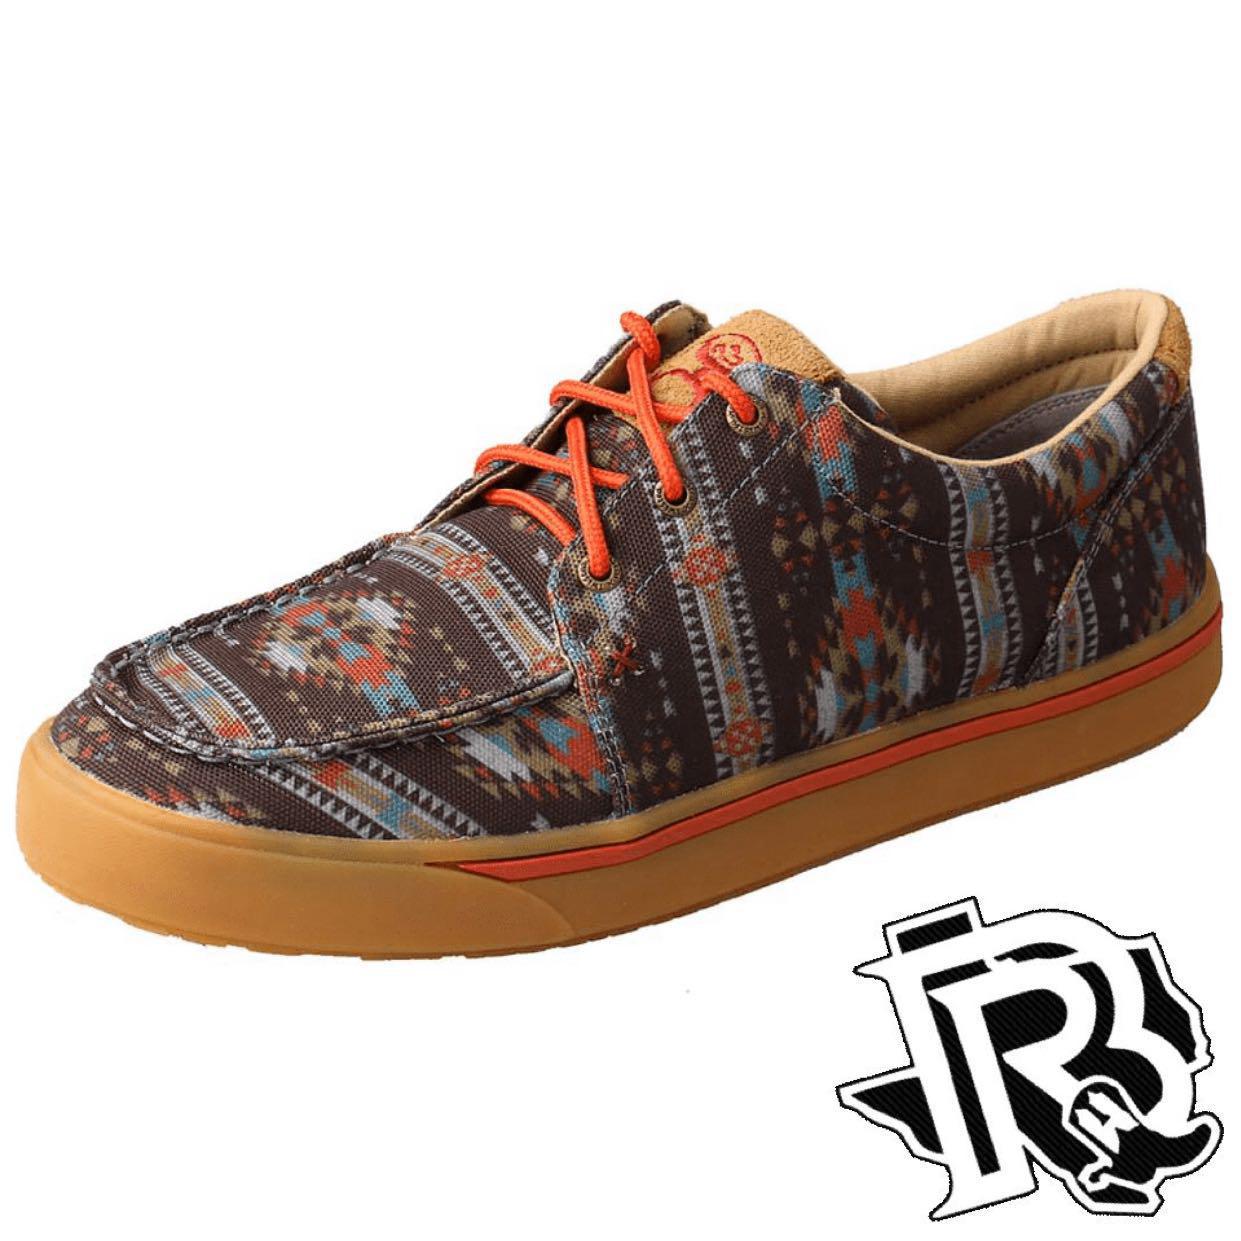 TWISTED X | Men’s Hooey Lopers (MHYC020)